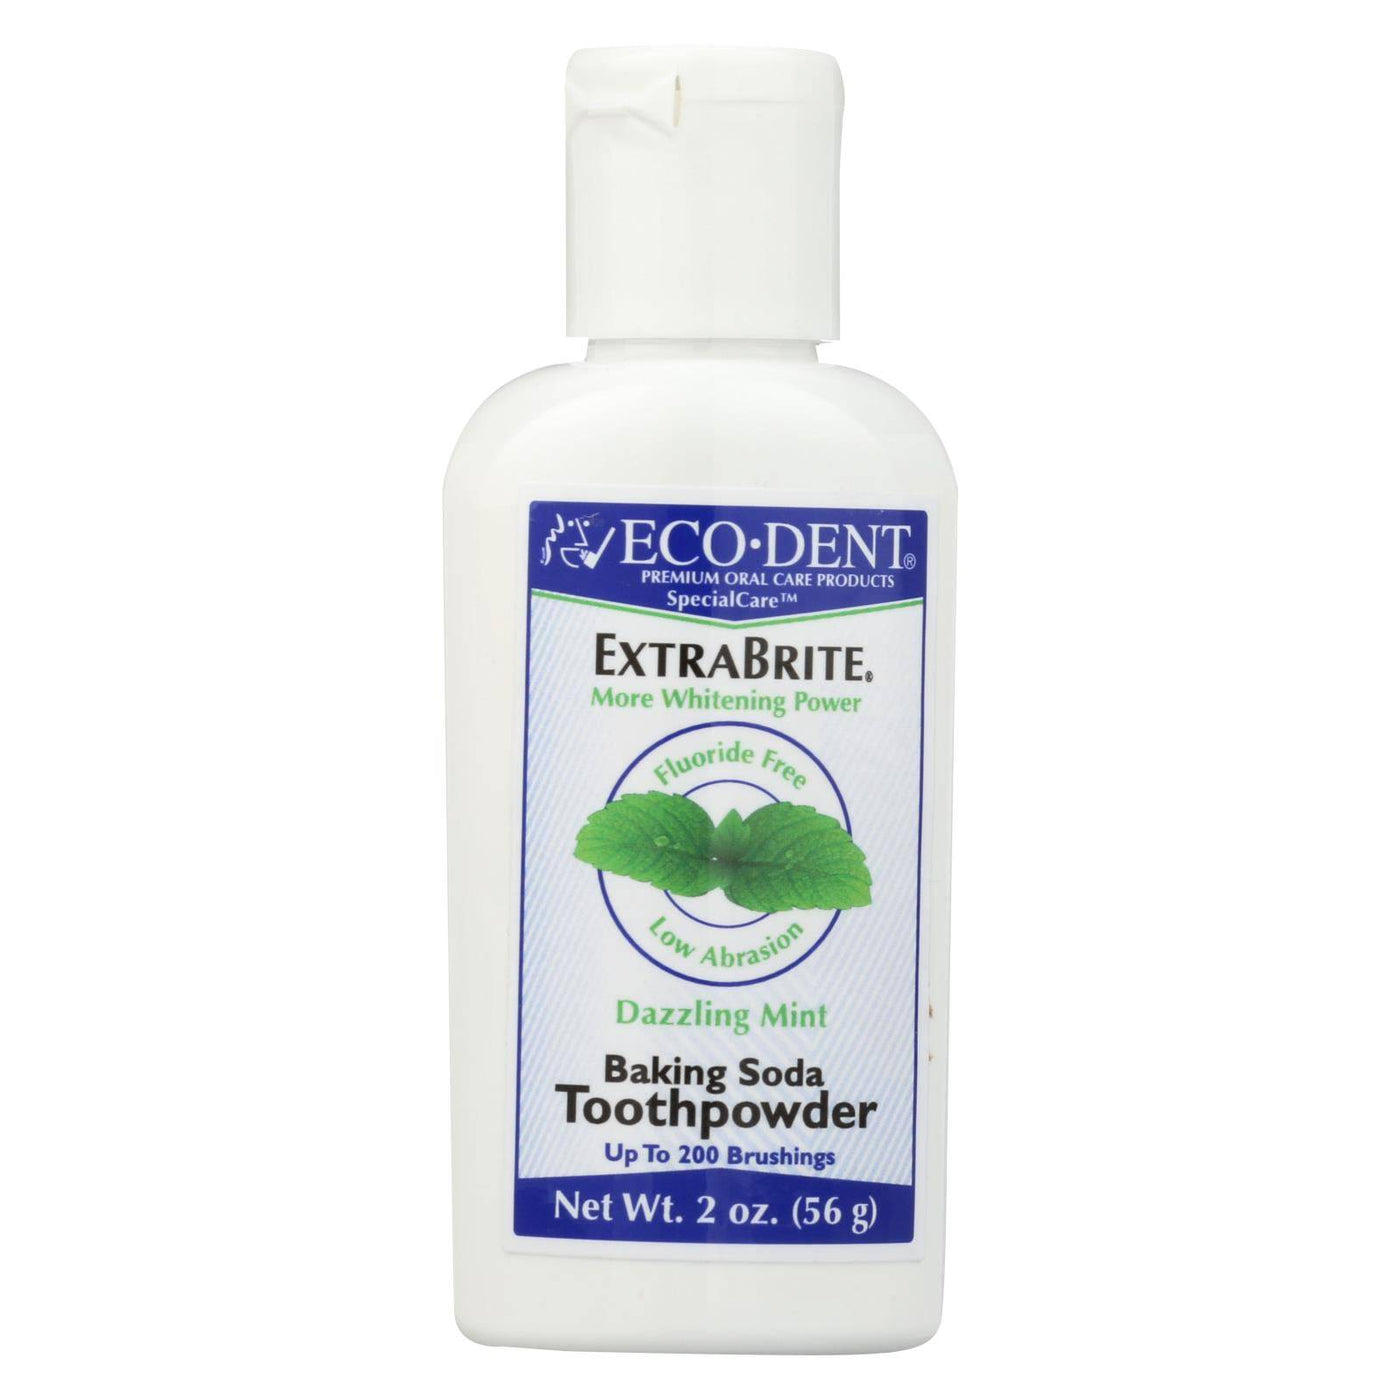 Buy Eco-dent Toothpowder Xtra-brite - Fluoride Free - 2 Oz  at OnlyNaturals.us